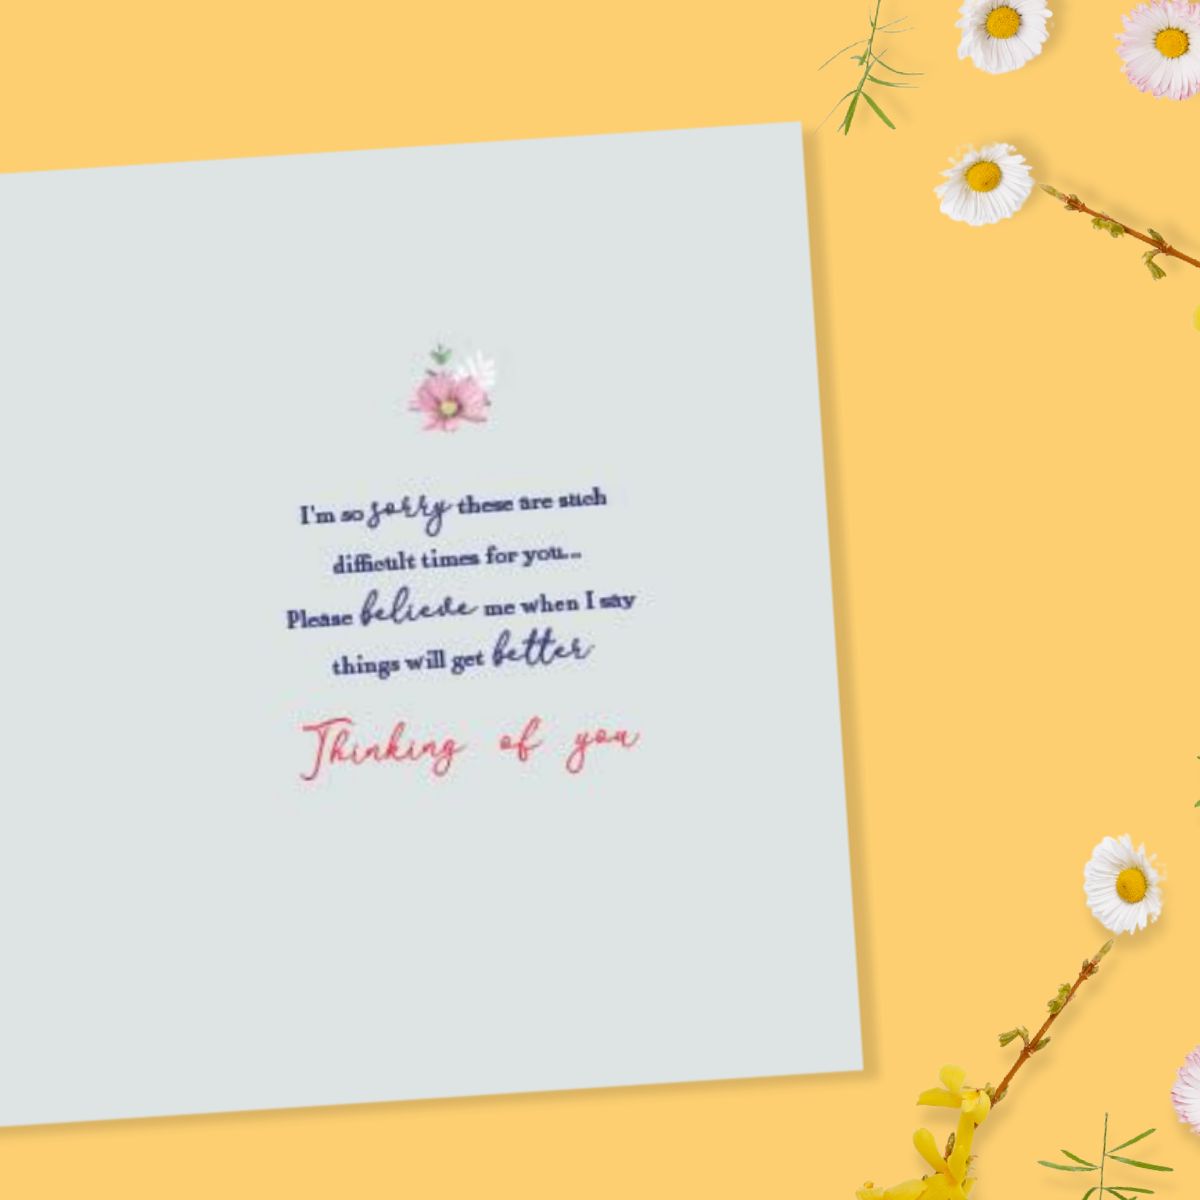 Inside image with grey card, blue text and pink and white floral details